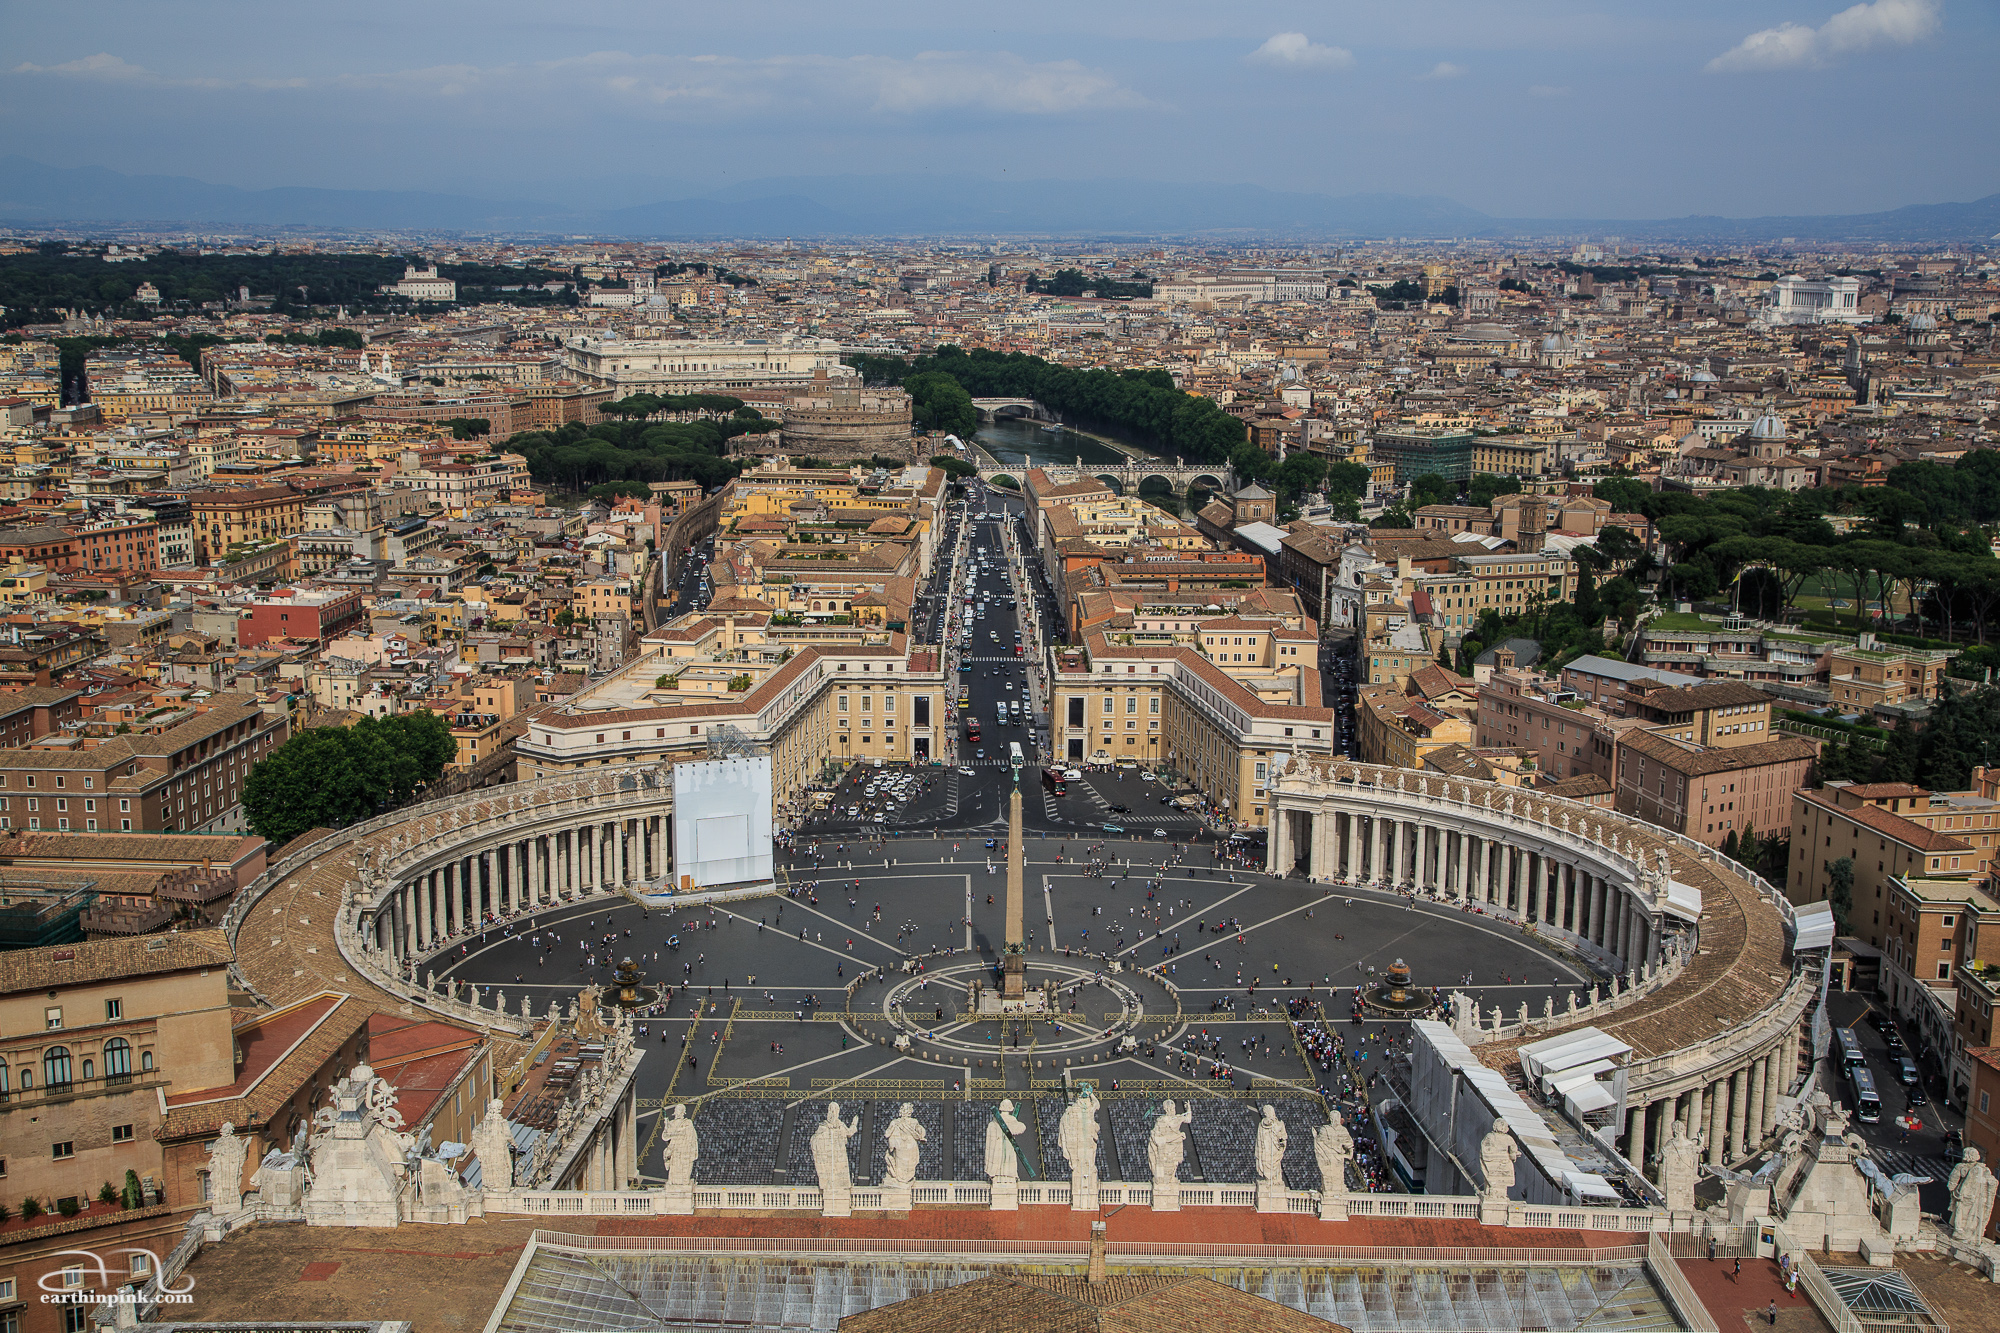 View from the top of St. Peter's Basilica.